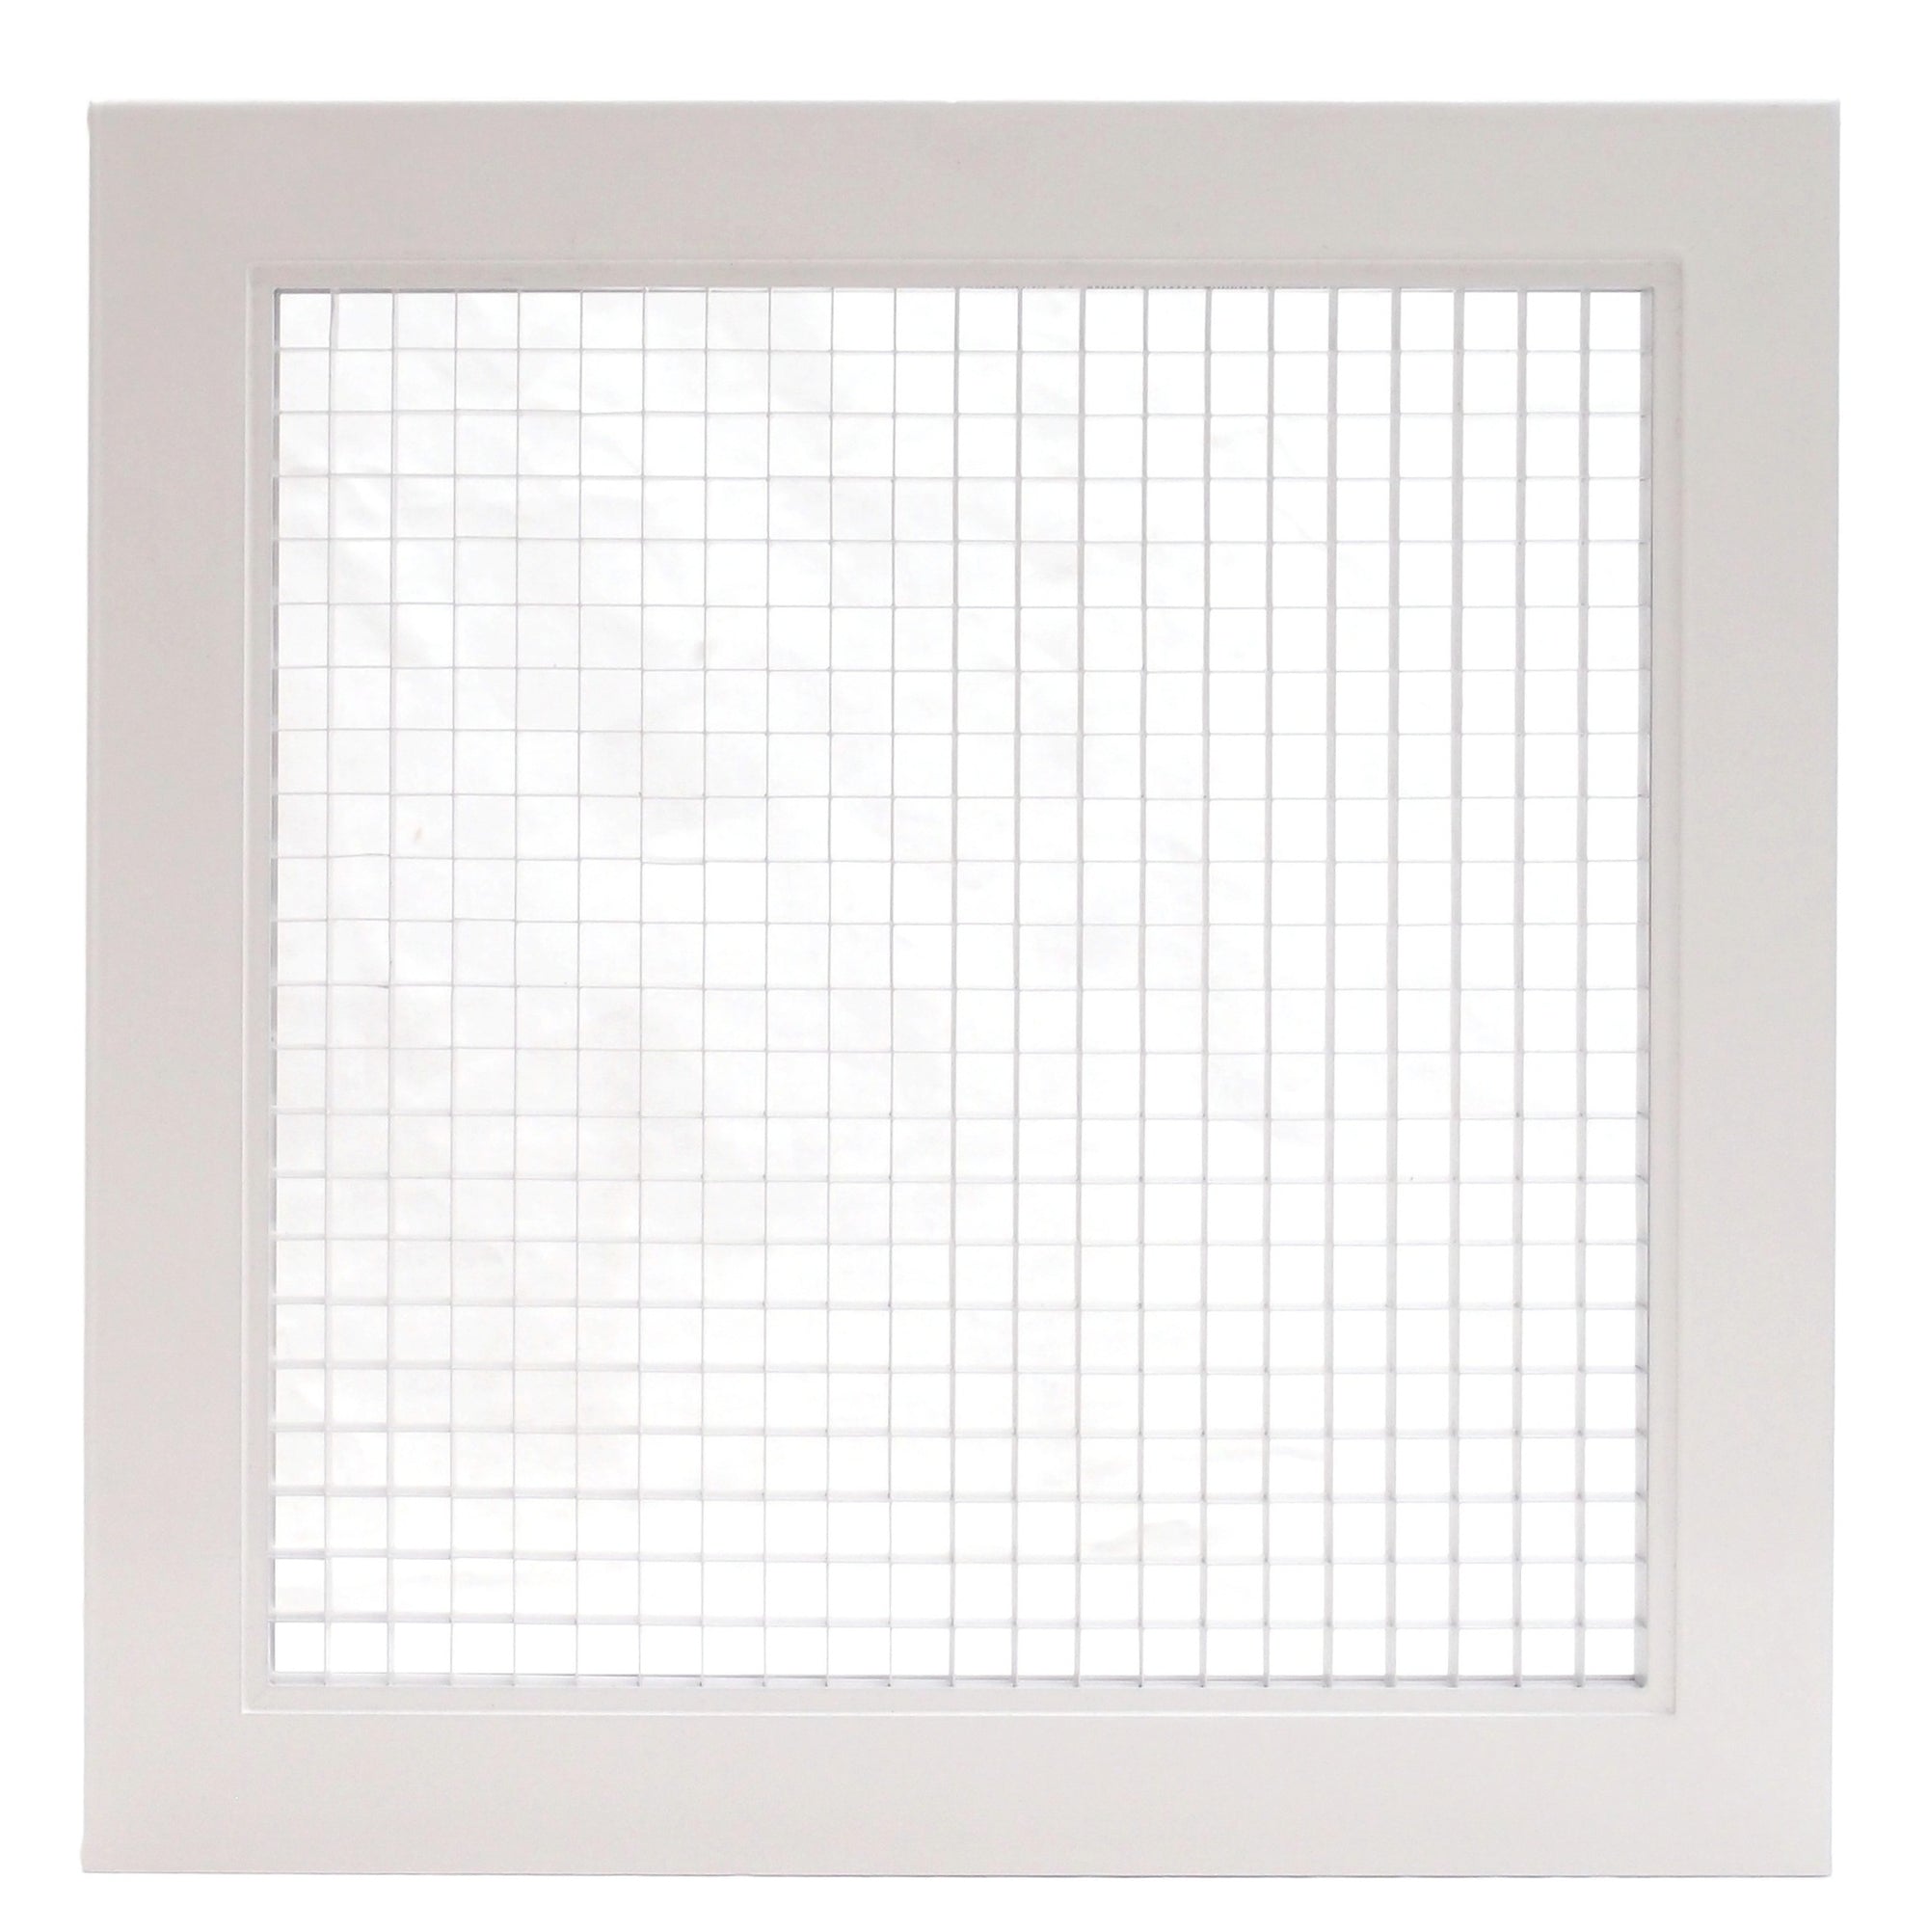 34" x 10" Cube Core Eggcrate Return Air Filter Grille for 1" Filter